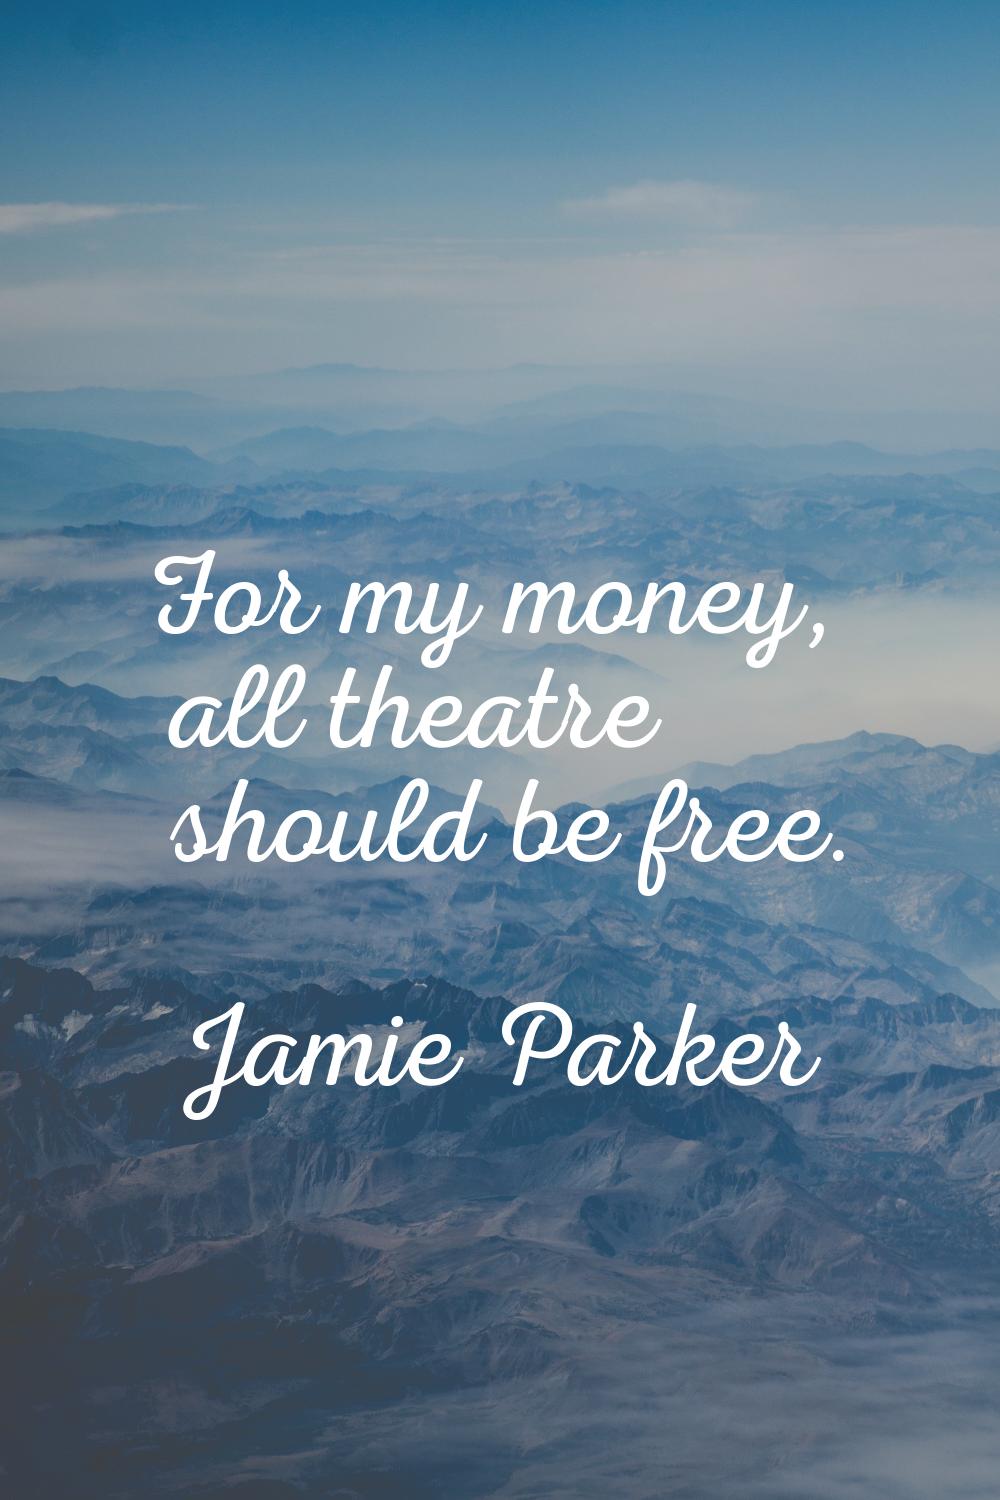 For my money, all theatre should be free.